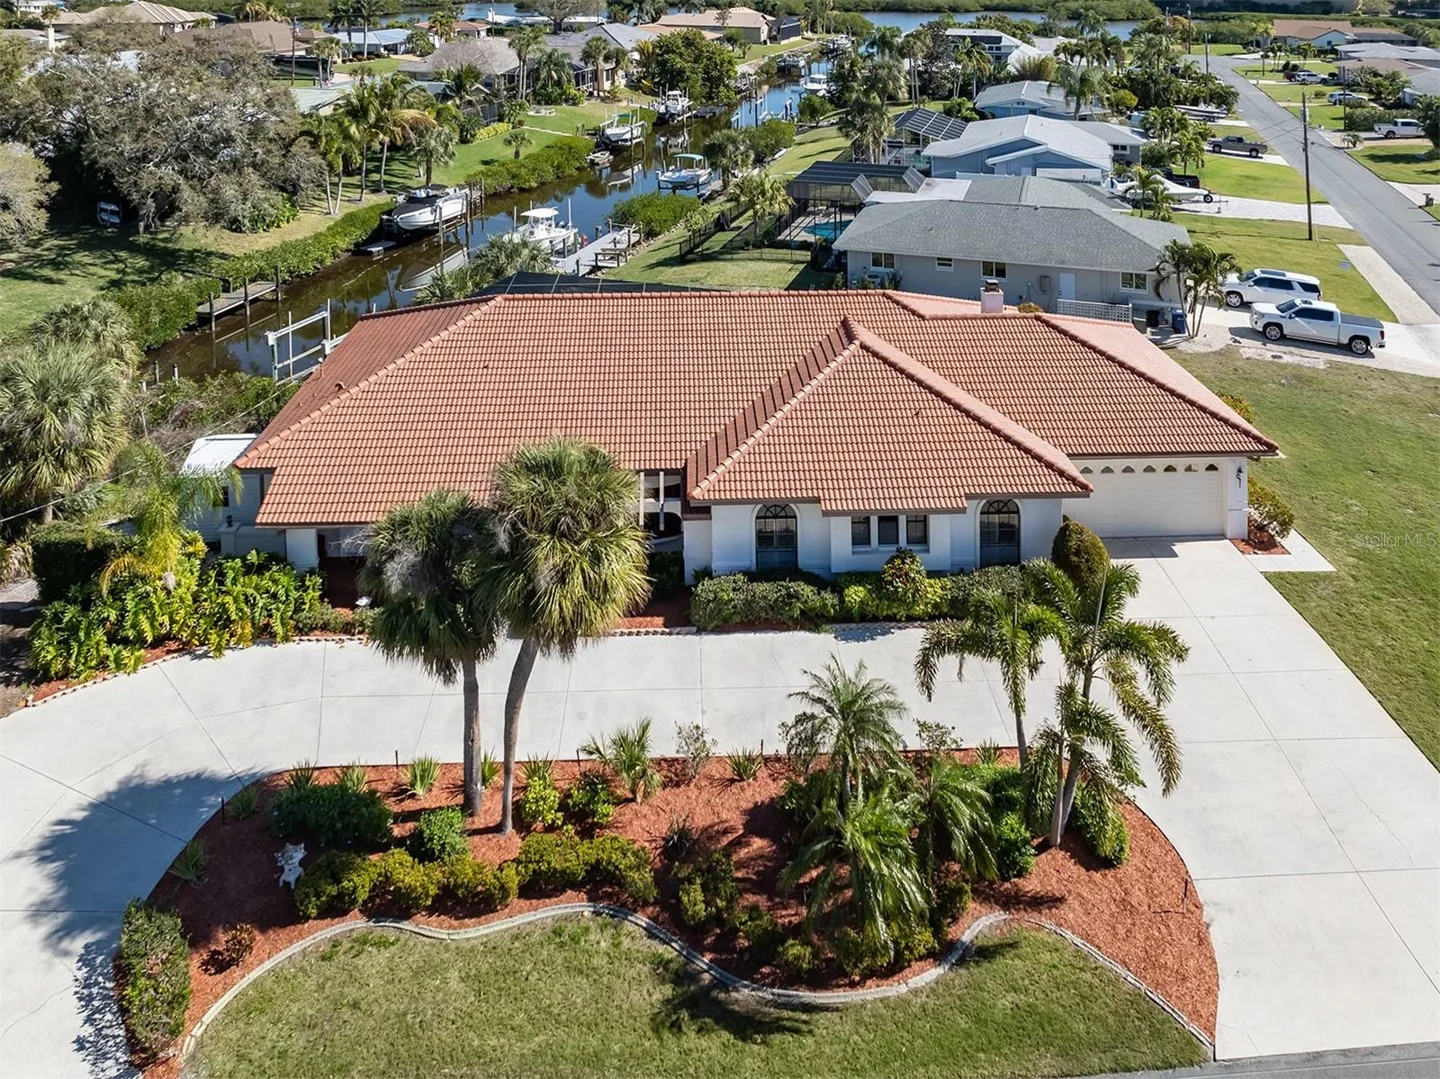 Experience waterfront living in Sorrento Shores!